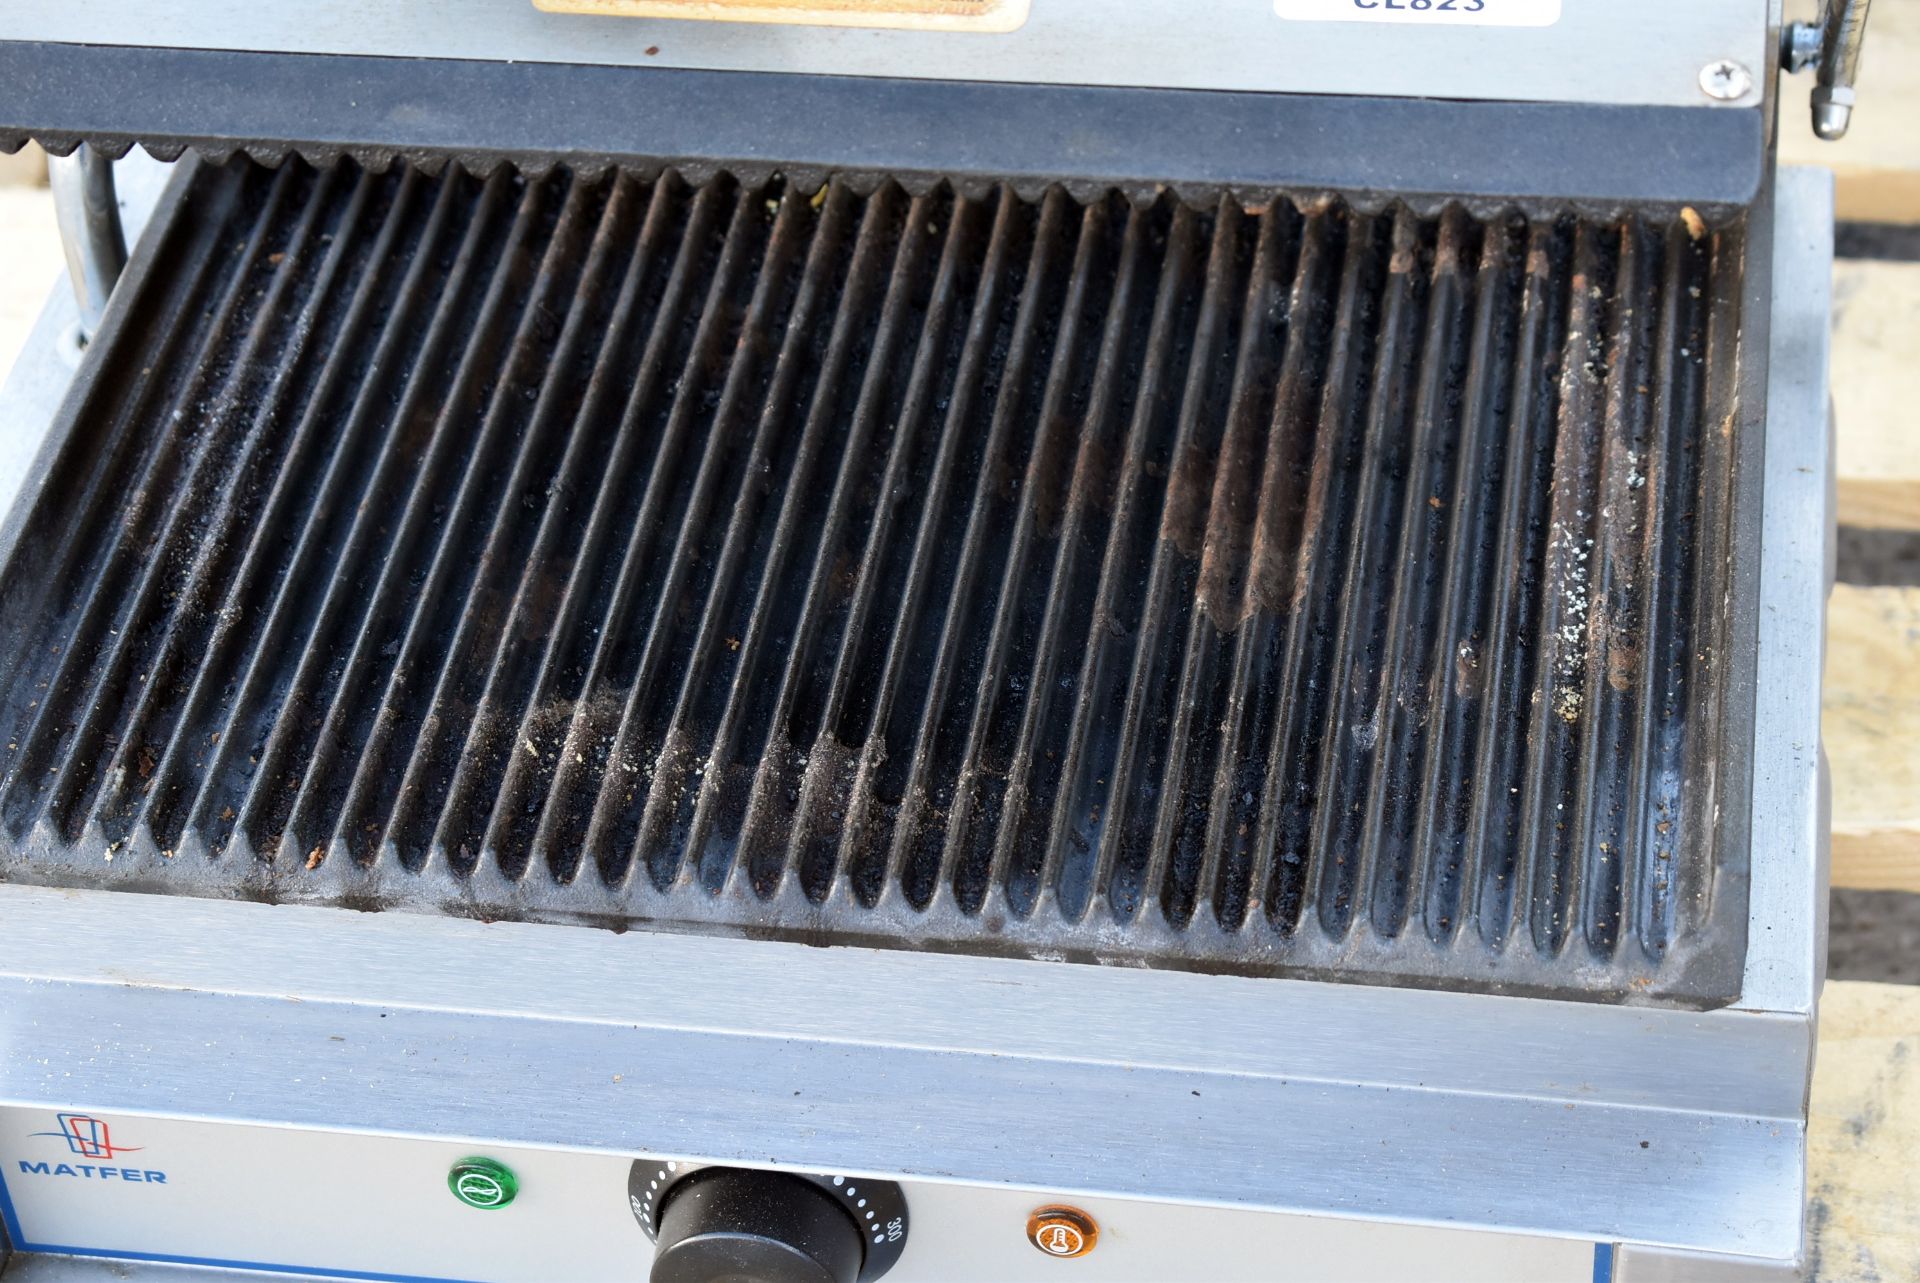 1 x Matfer GH-811PK 2200W Contact Grill - Image 2 of 4